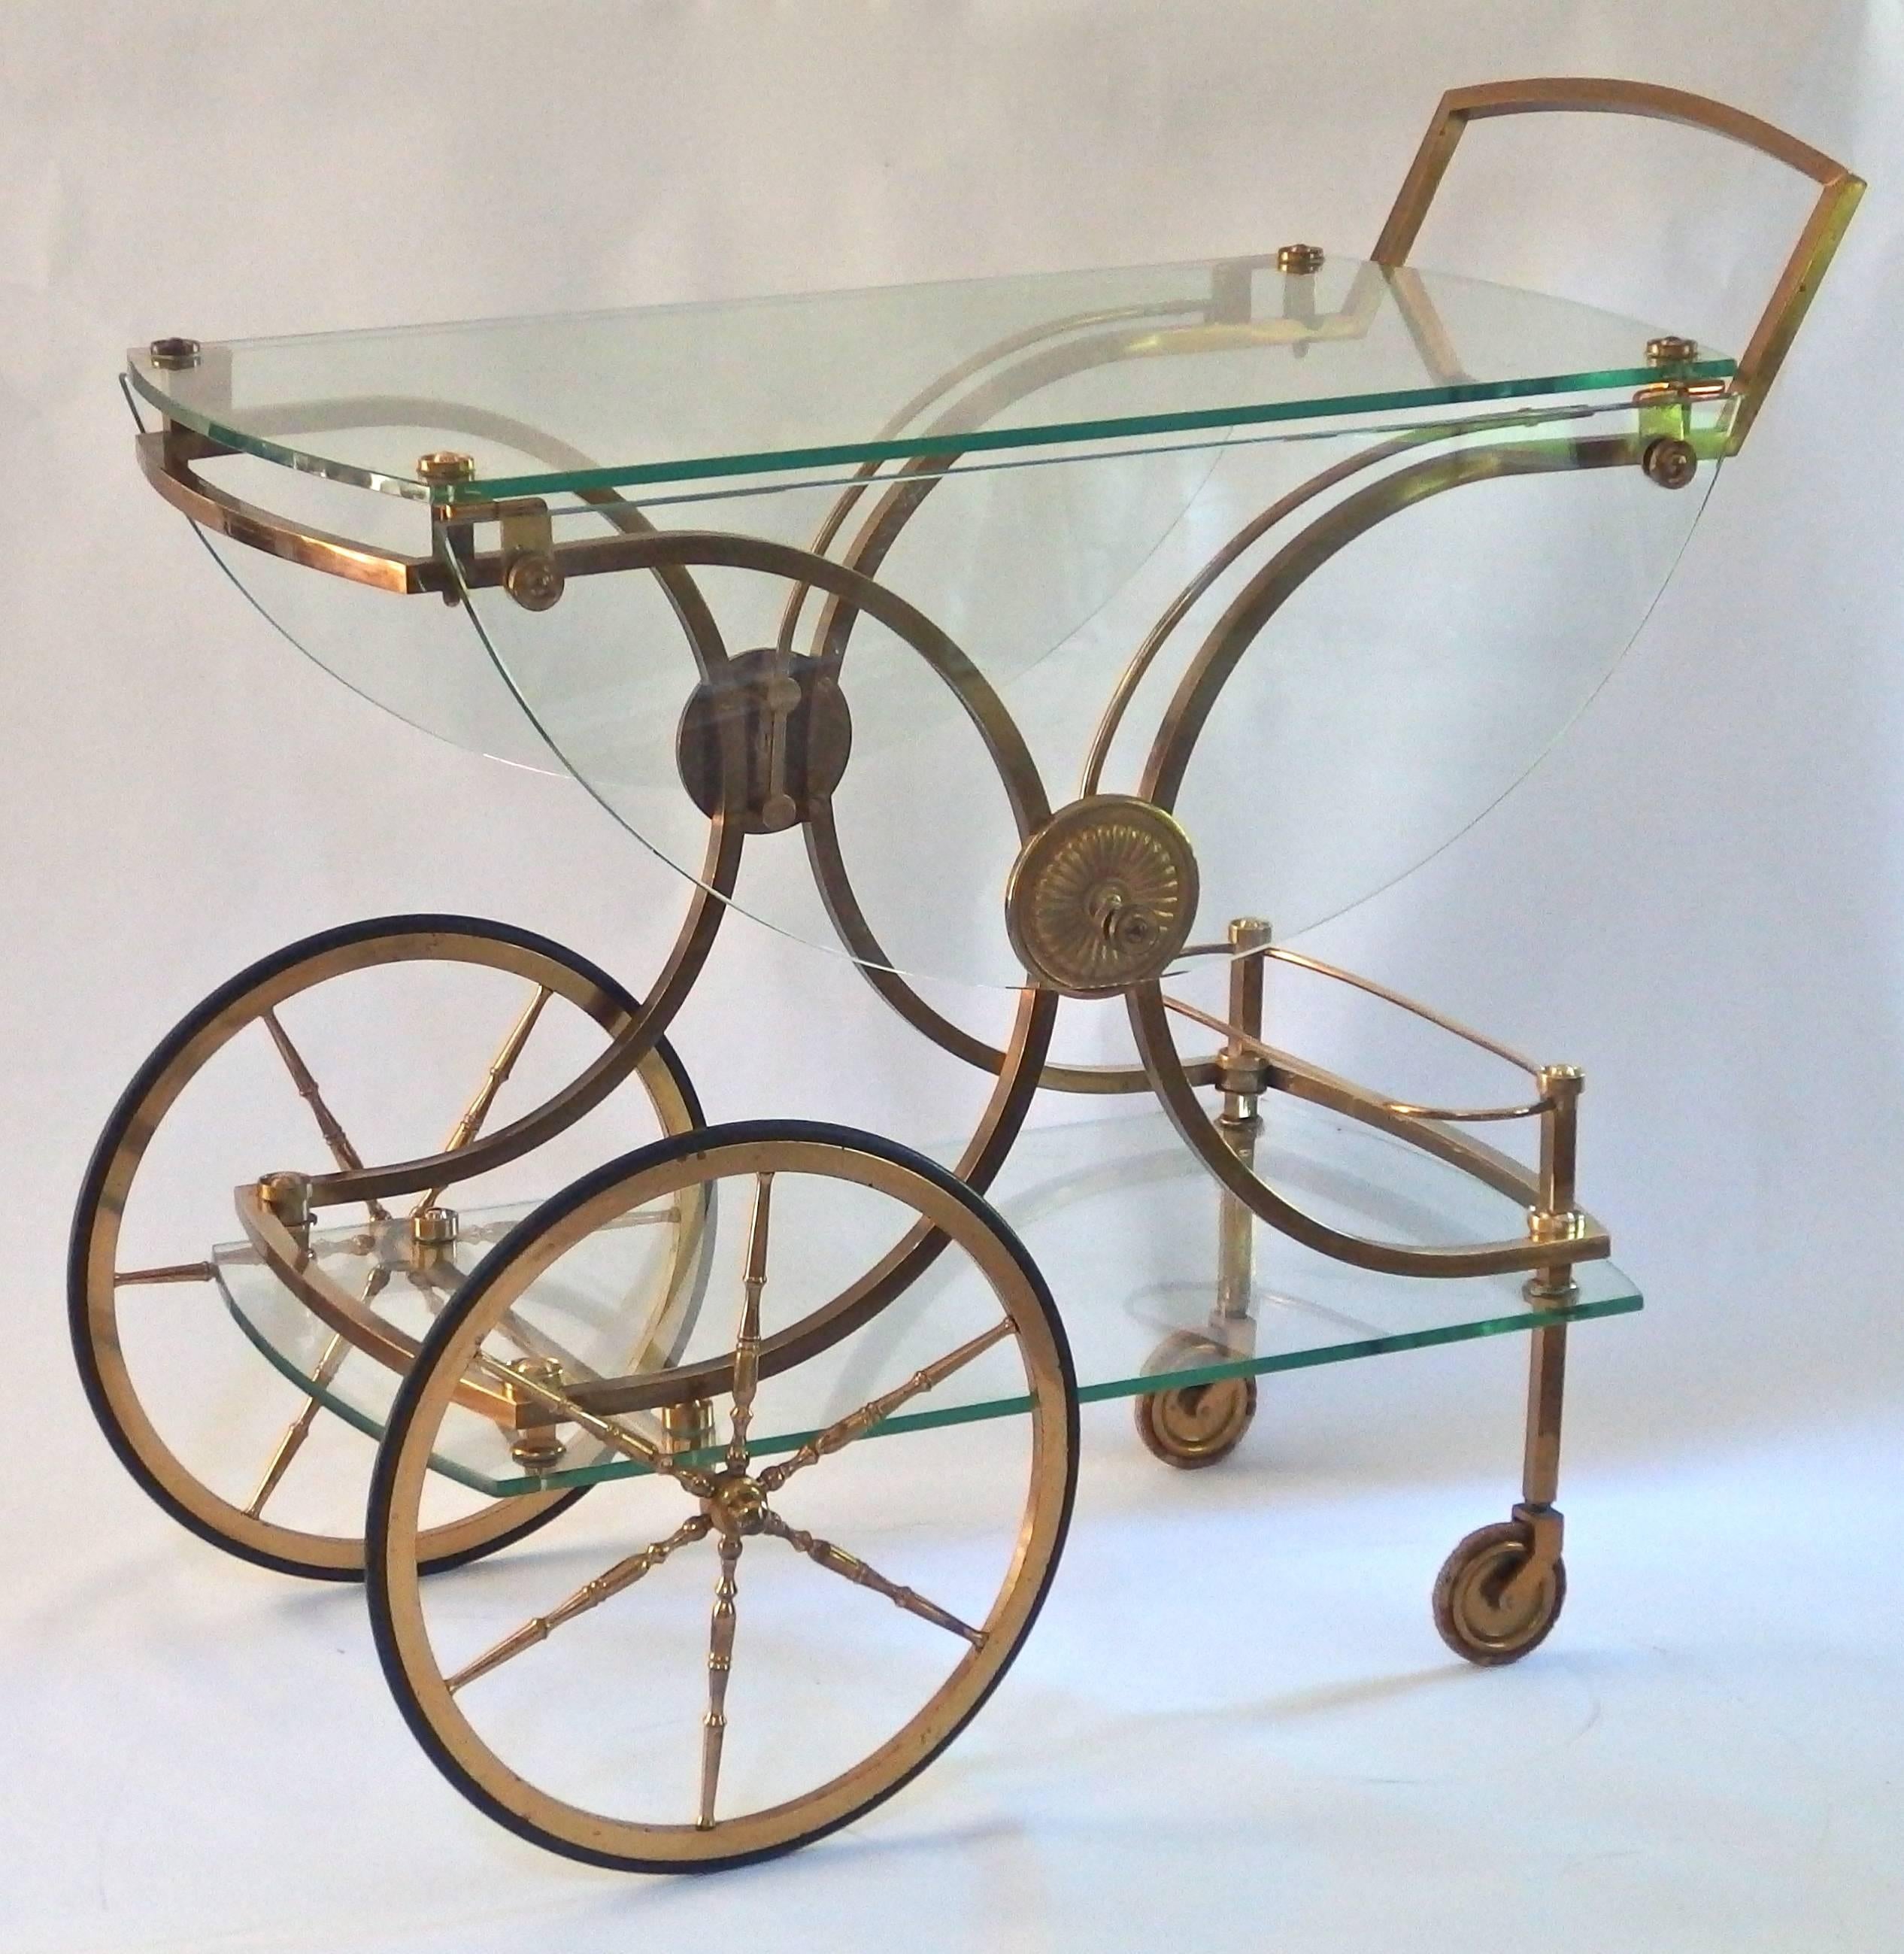 Outstanding French clear glass and brass drinks trolley with folding sides attributed to Maison Charles.

 Dimensions: H 80, W 90, D 48 
The height of the top shelve is 70 cm and the width when folded out is 95cm.